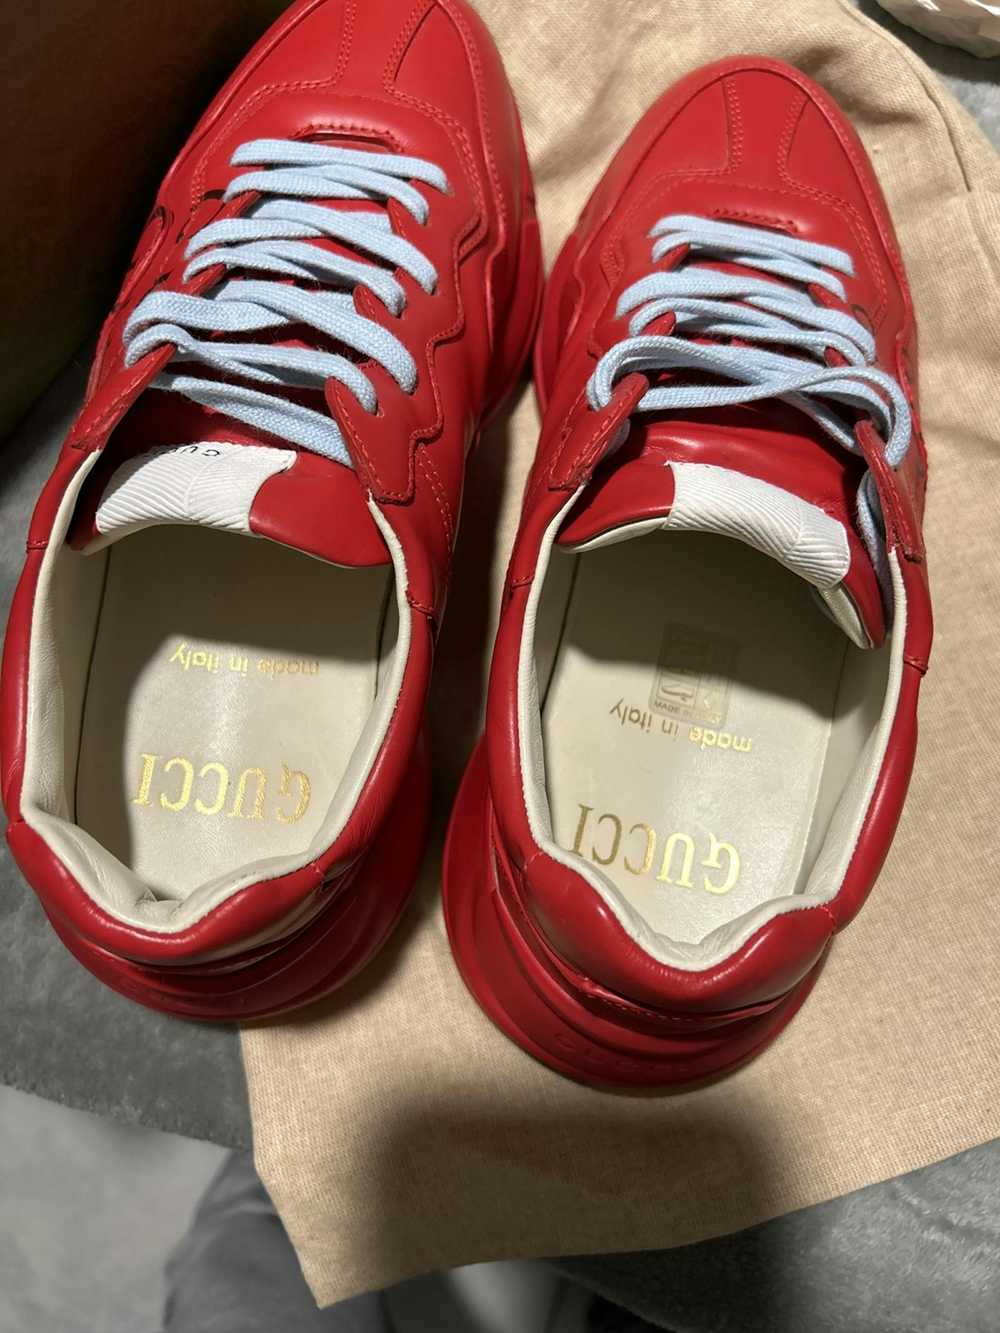 Gucci Gucci 100 Rython sneakers - image 9